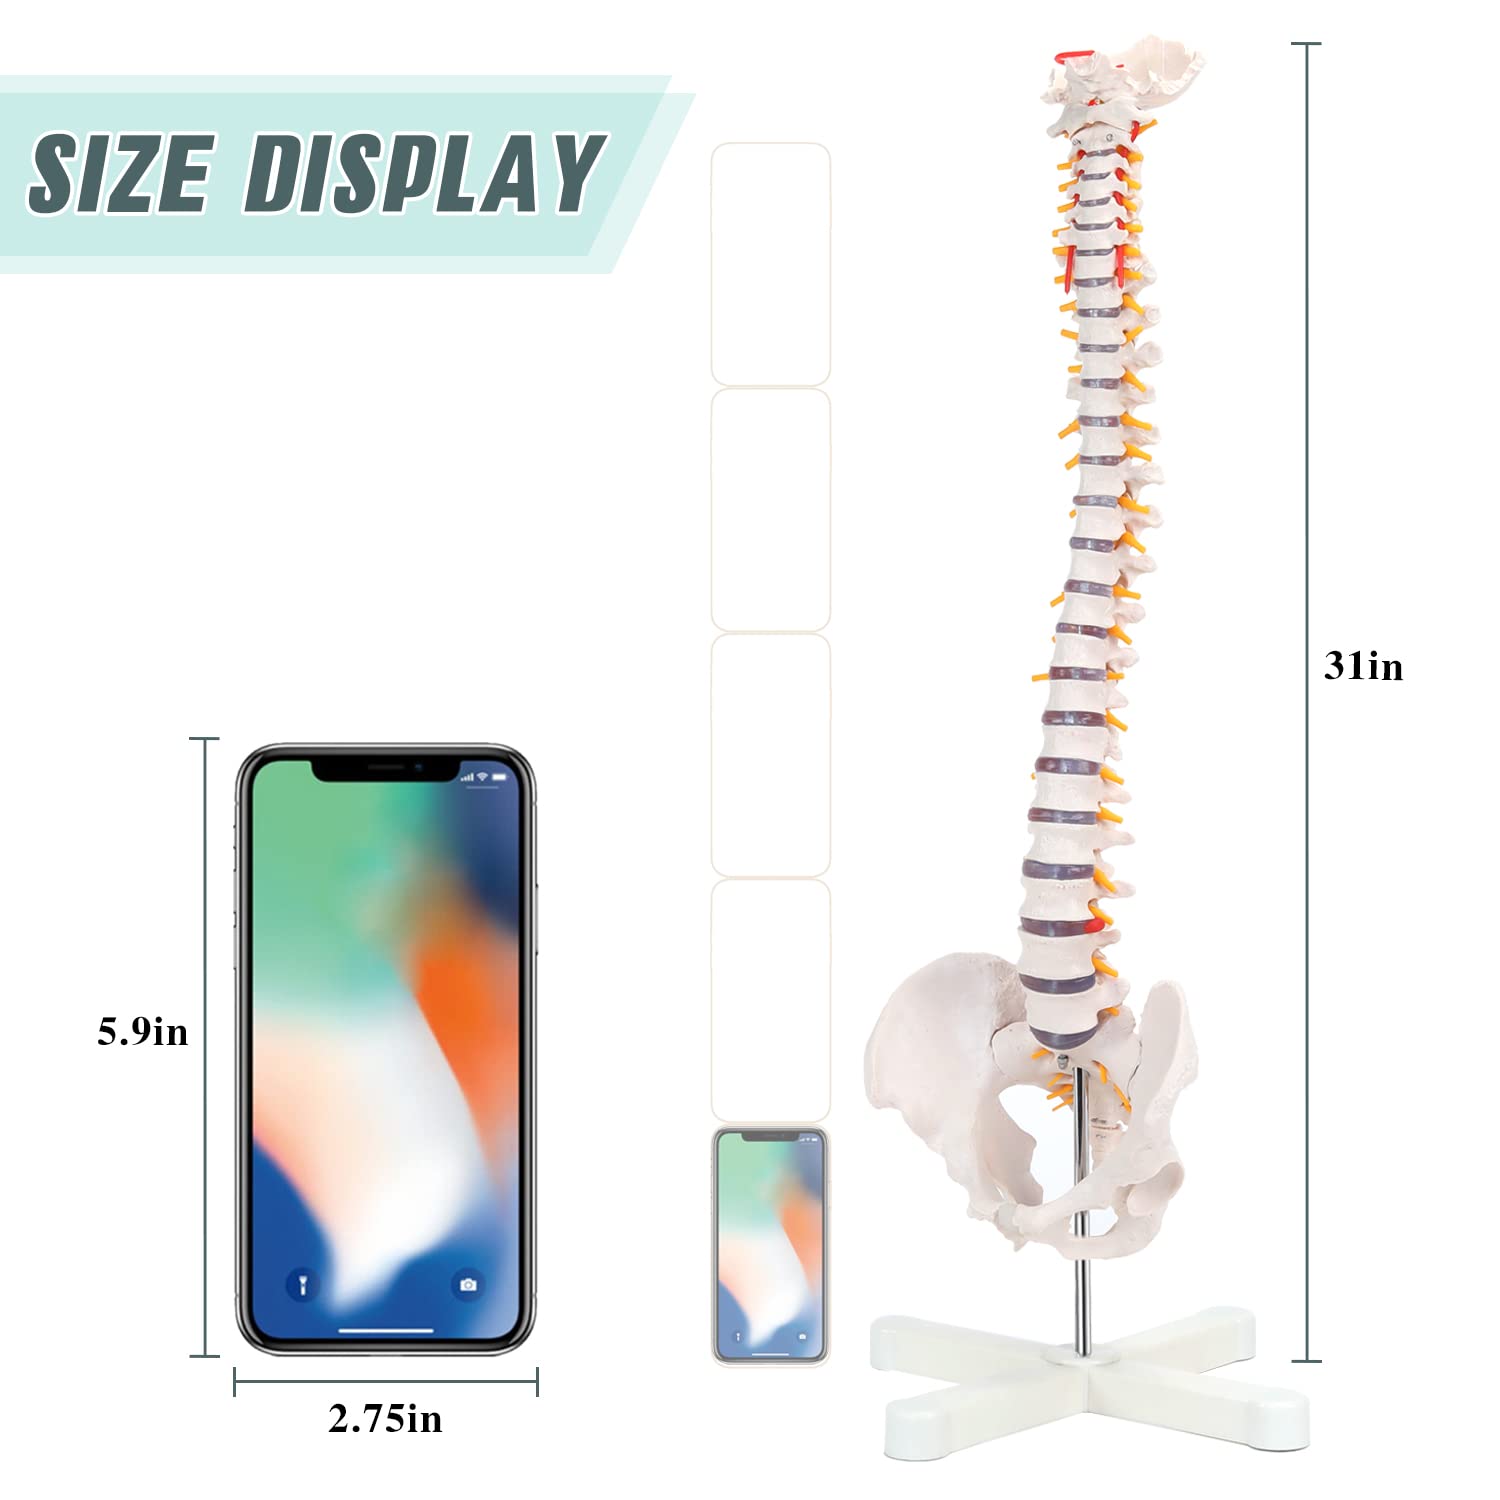 RONTEN 31" Human Spine Model Life-Size Spinal Cord Model size